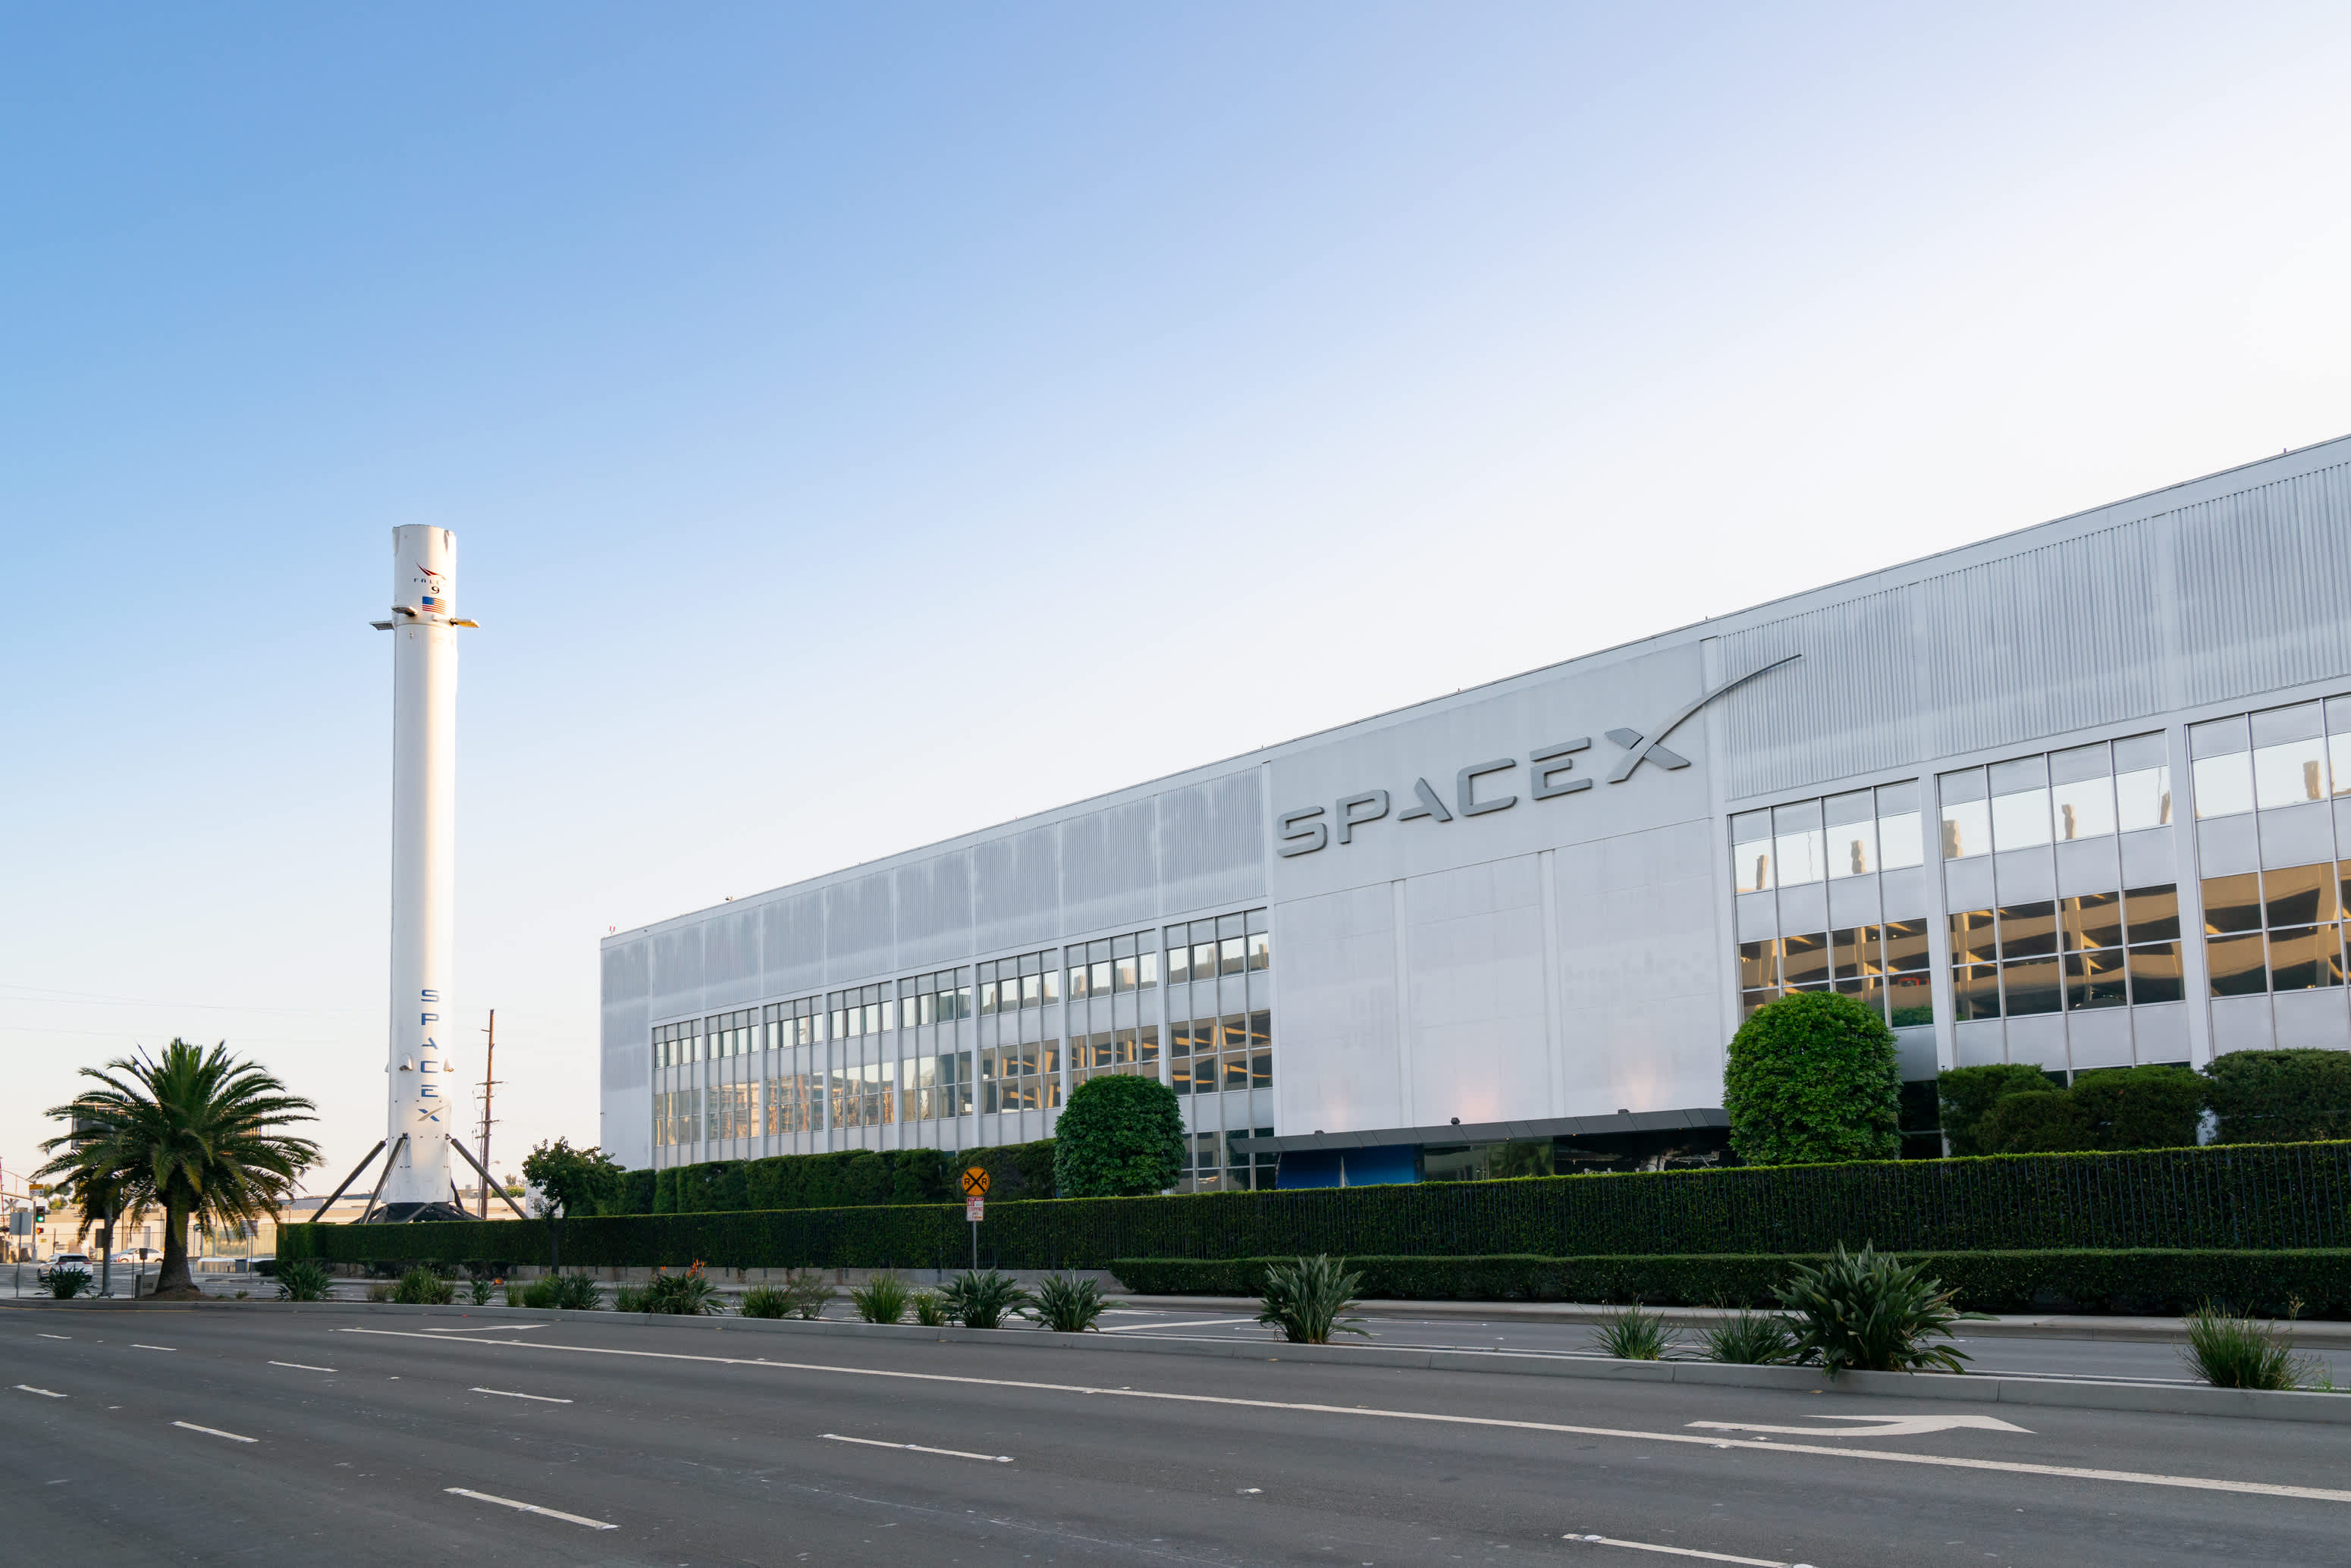 SpaceX engineer pleads guilty to charges of insider trading by DOJ